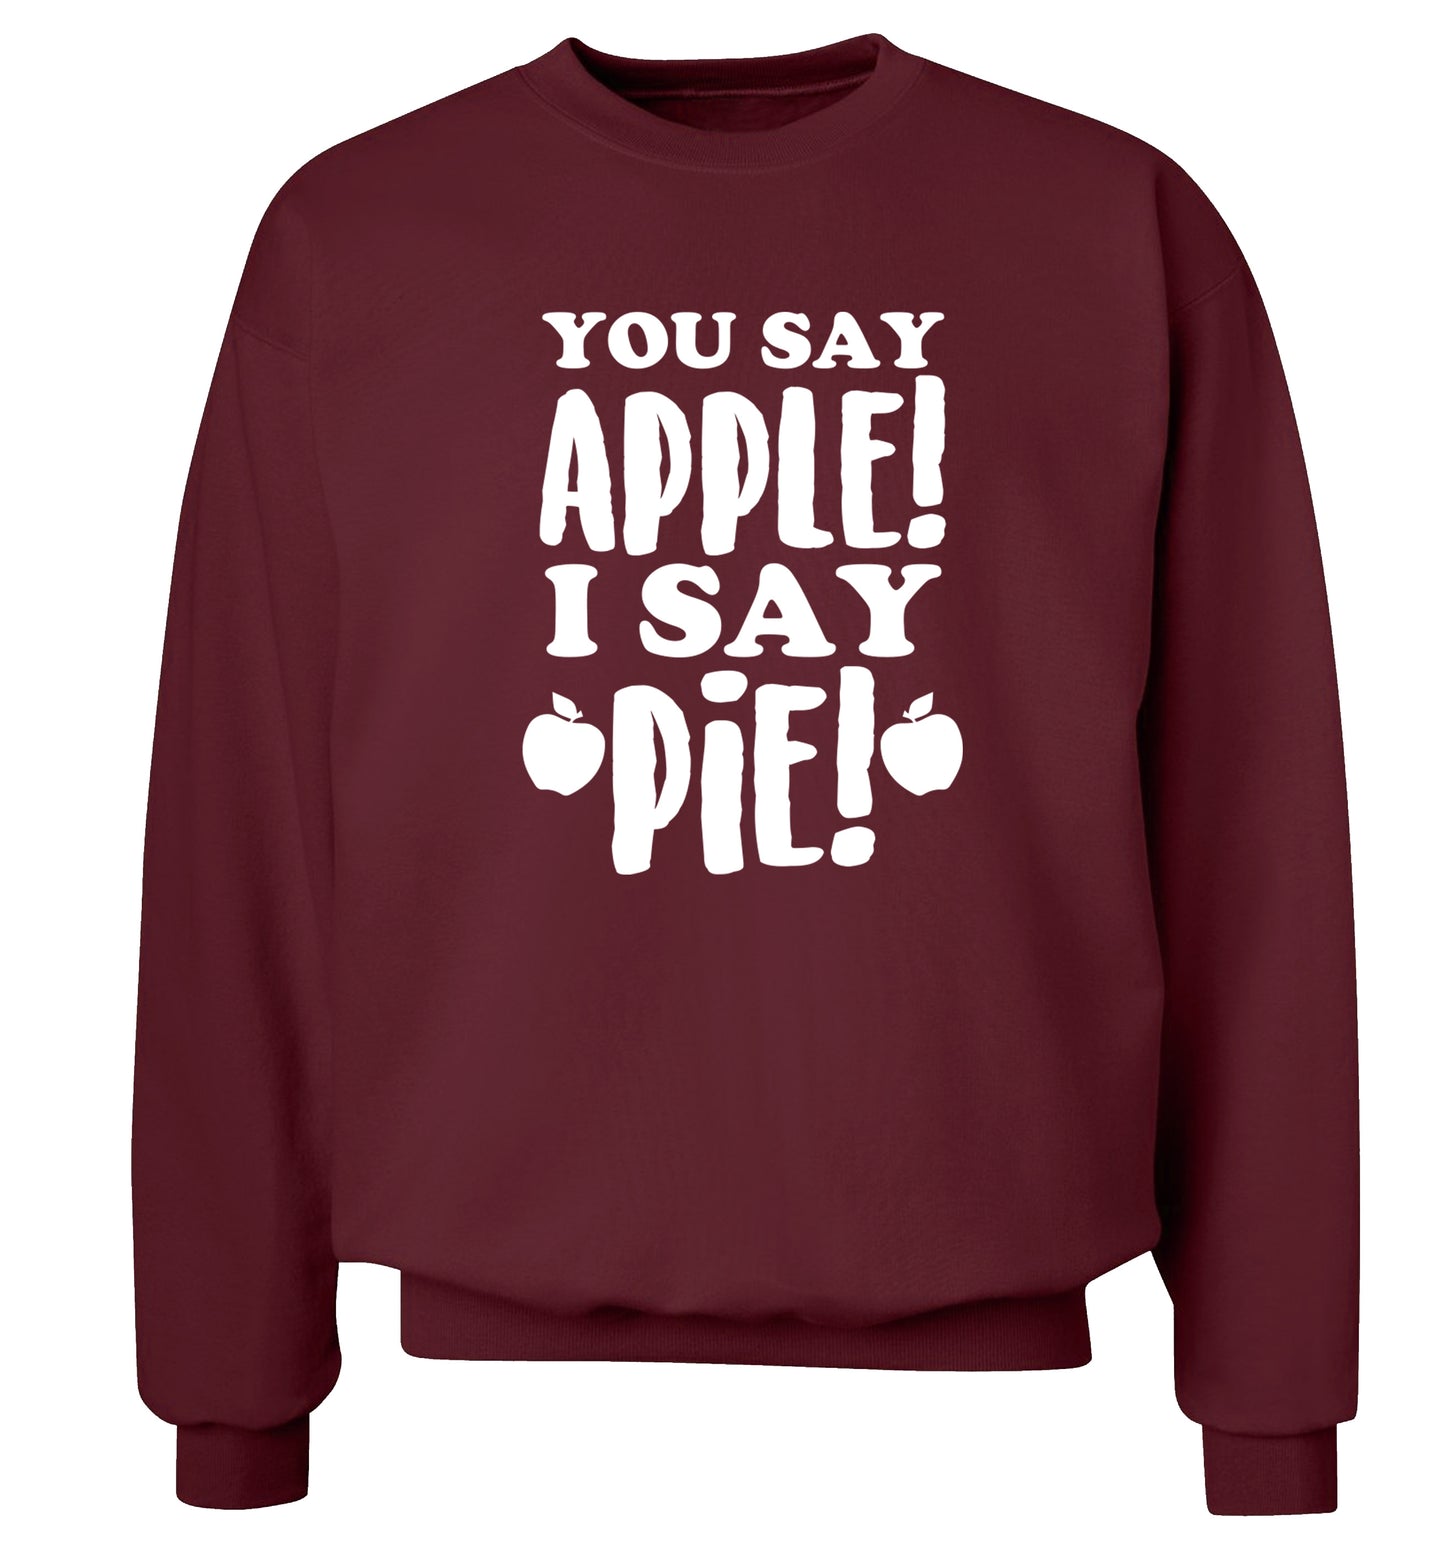 You say apple I say pie! Adult's unisex maroon Sweater 2XL